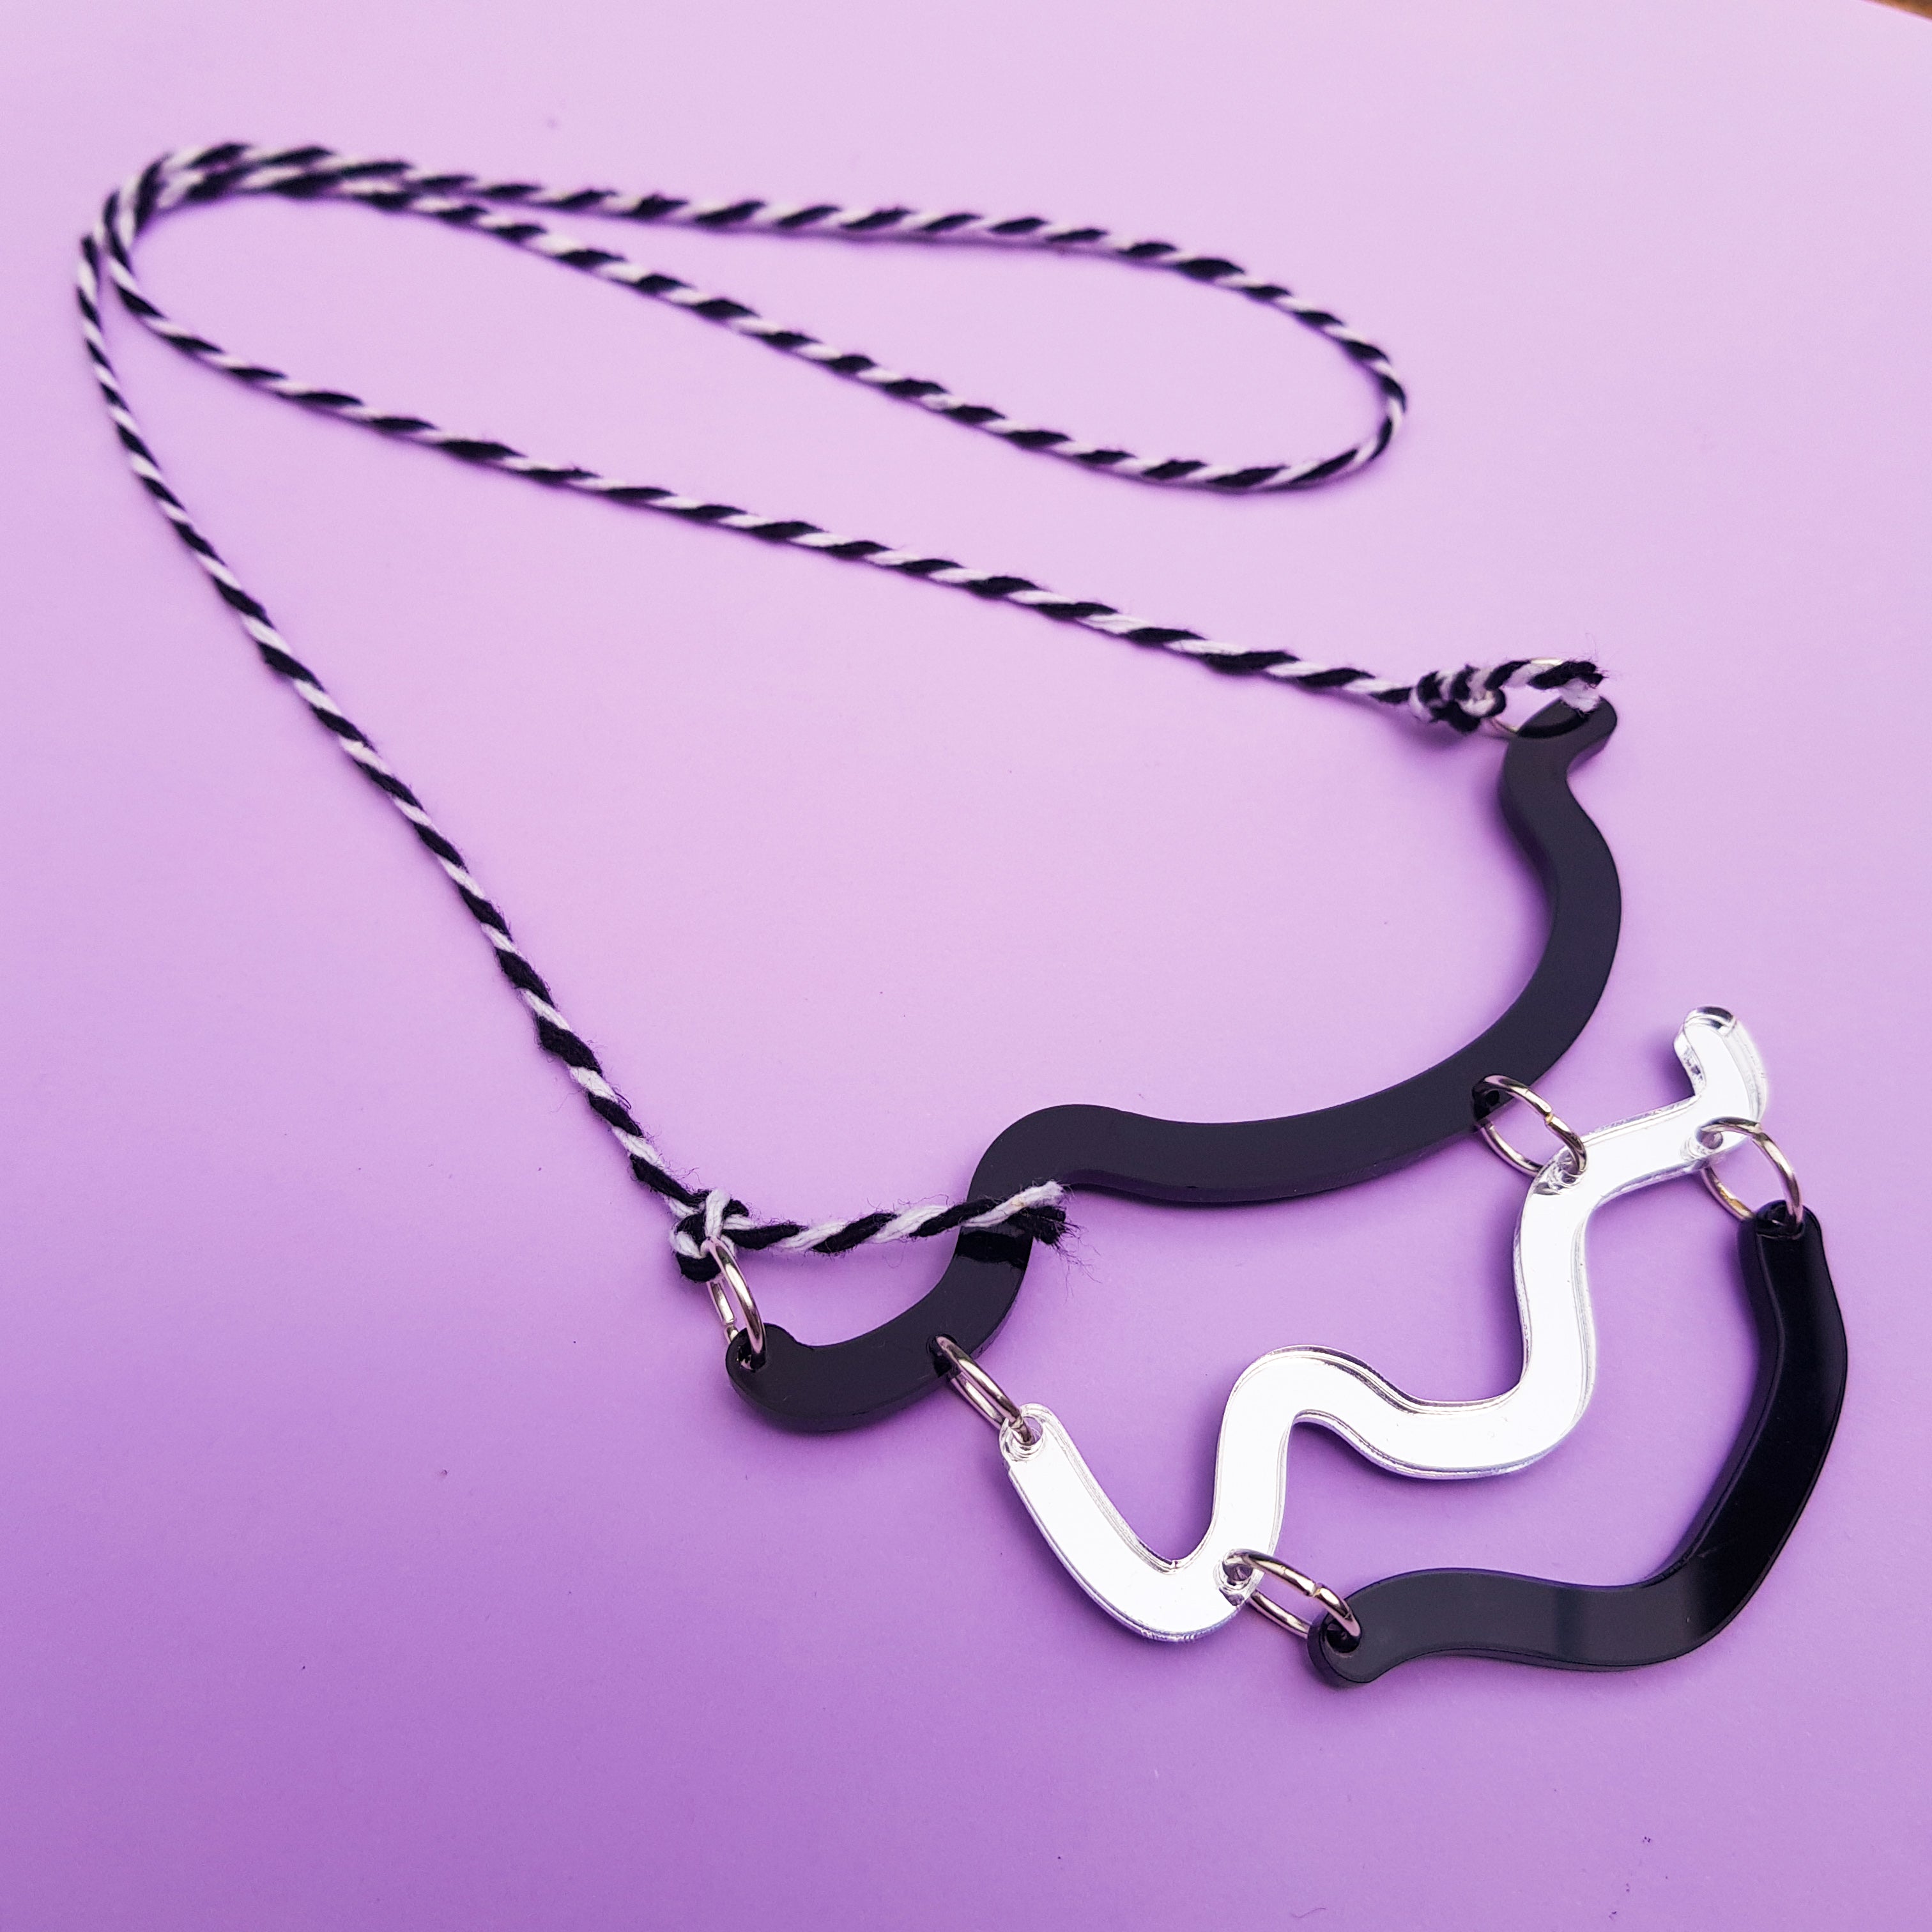 Wiggle necklace